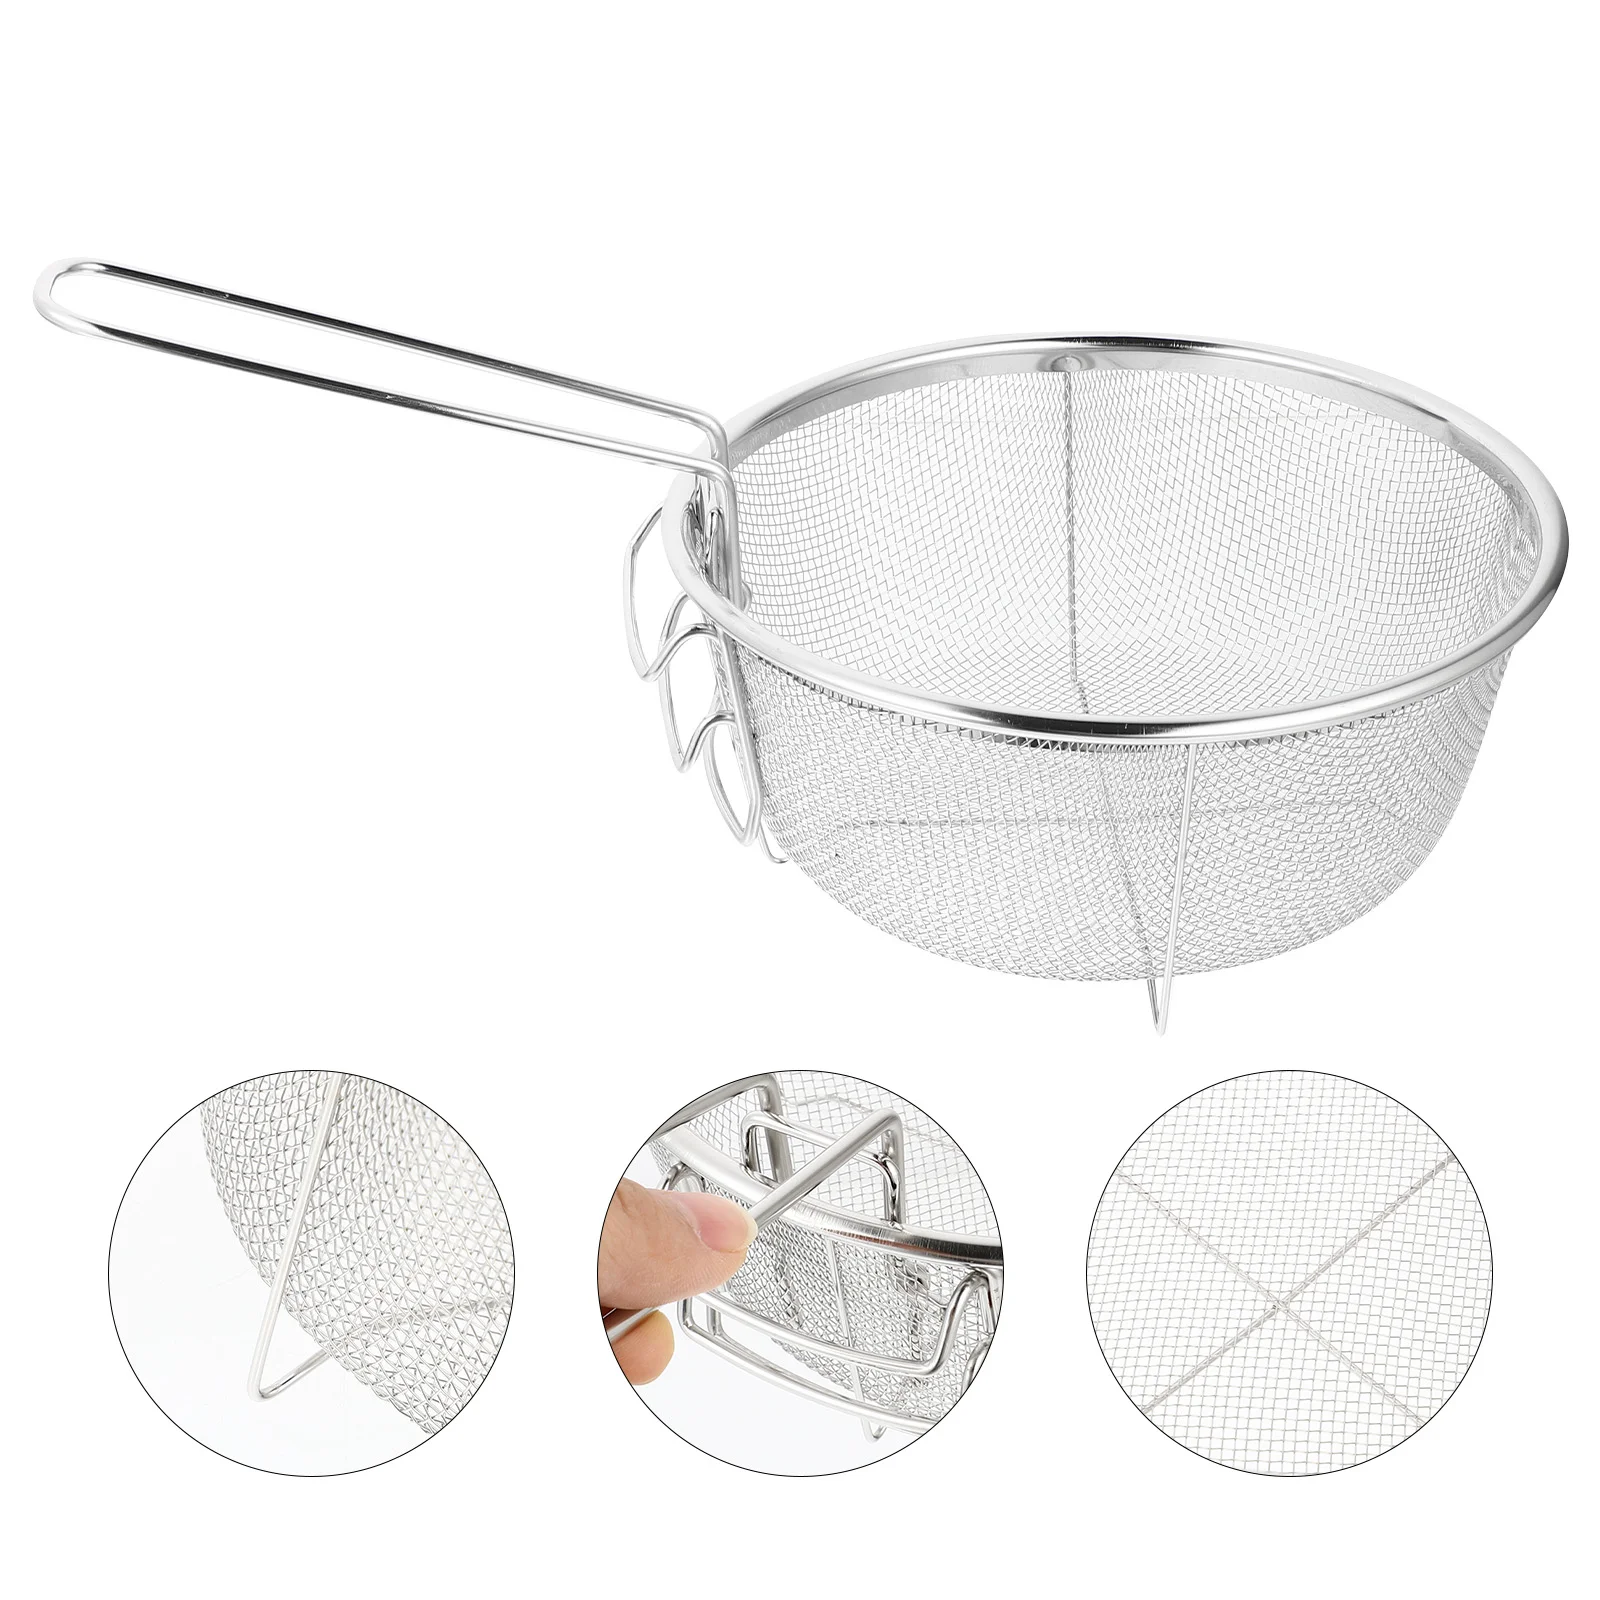 

Basket Fry Frying Strainer Fryer French Baskets Deep Mesh Skimmer Stainless Steel Fries Wire Colander Net Serving Handle Chips